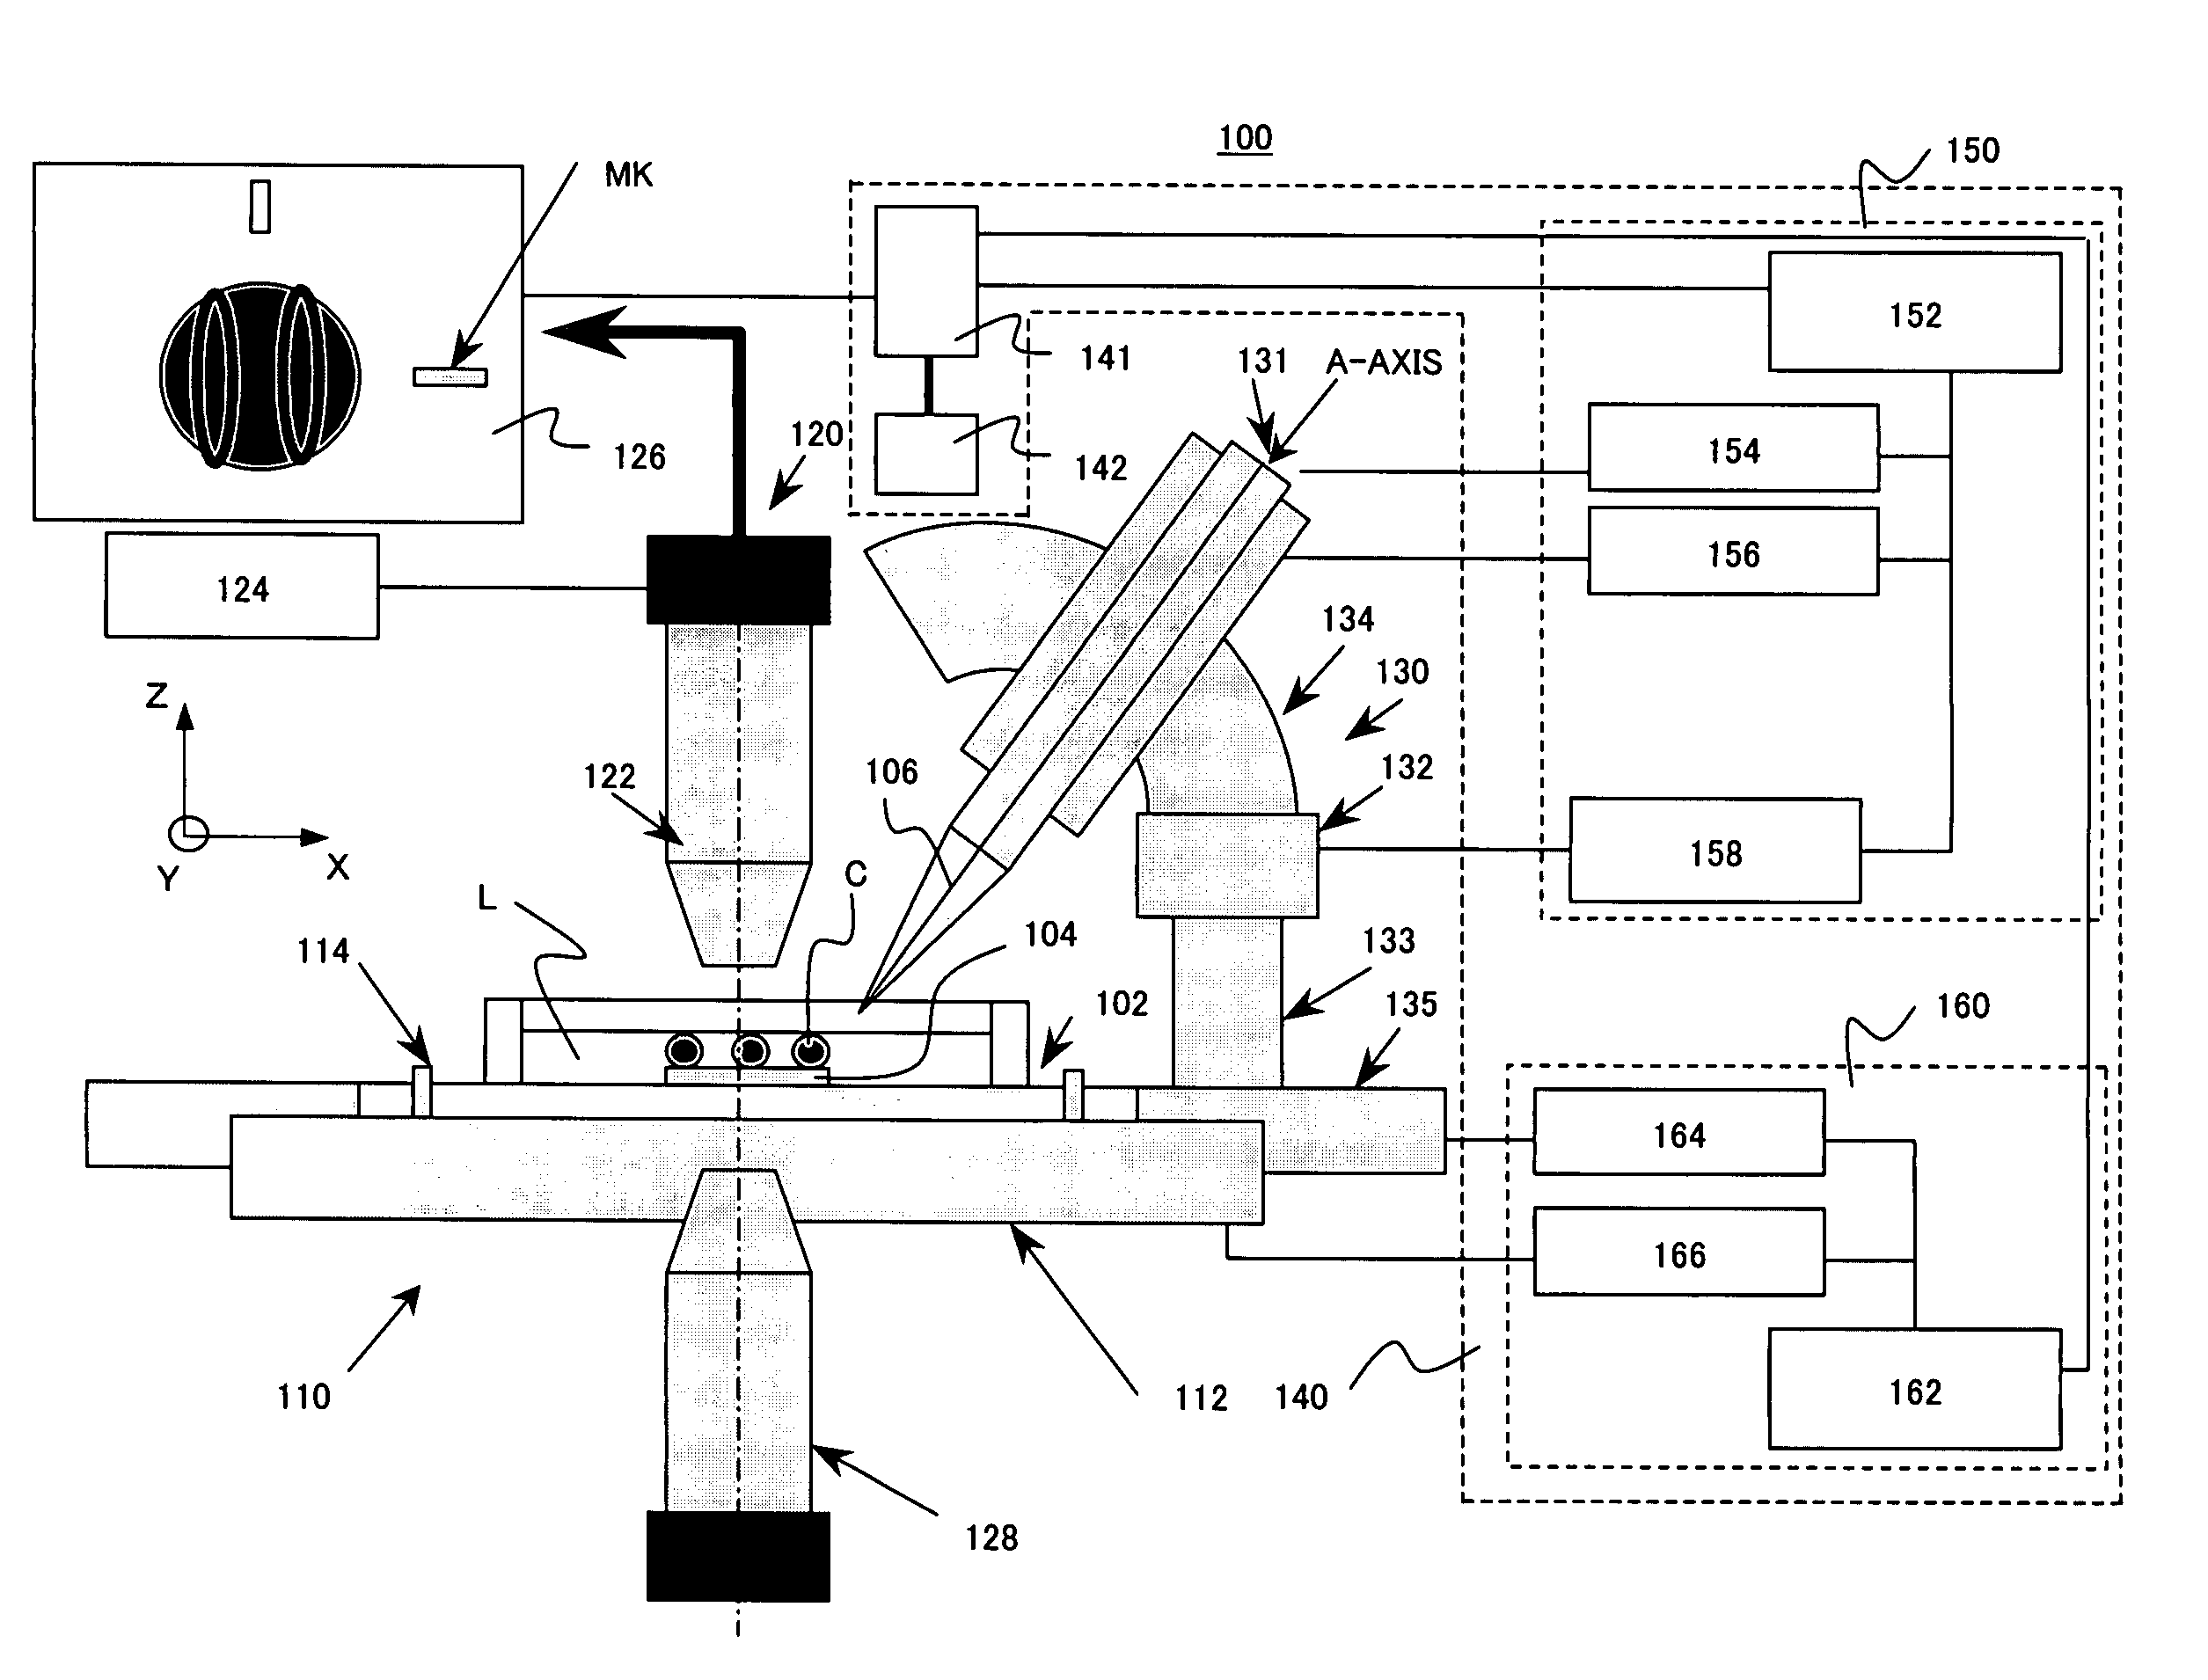 Injection apparatus and method